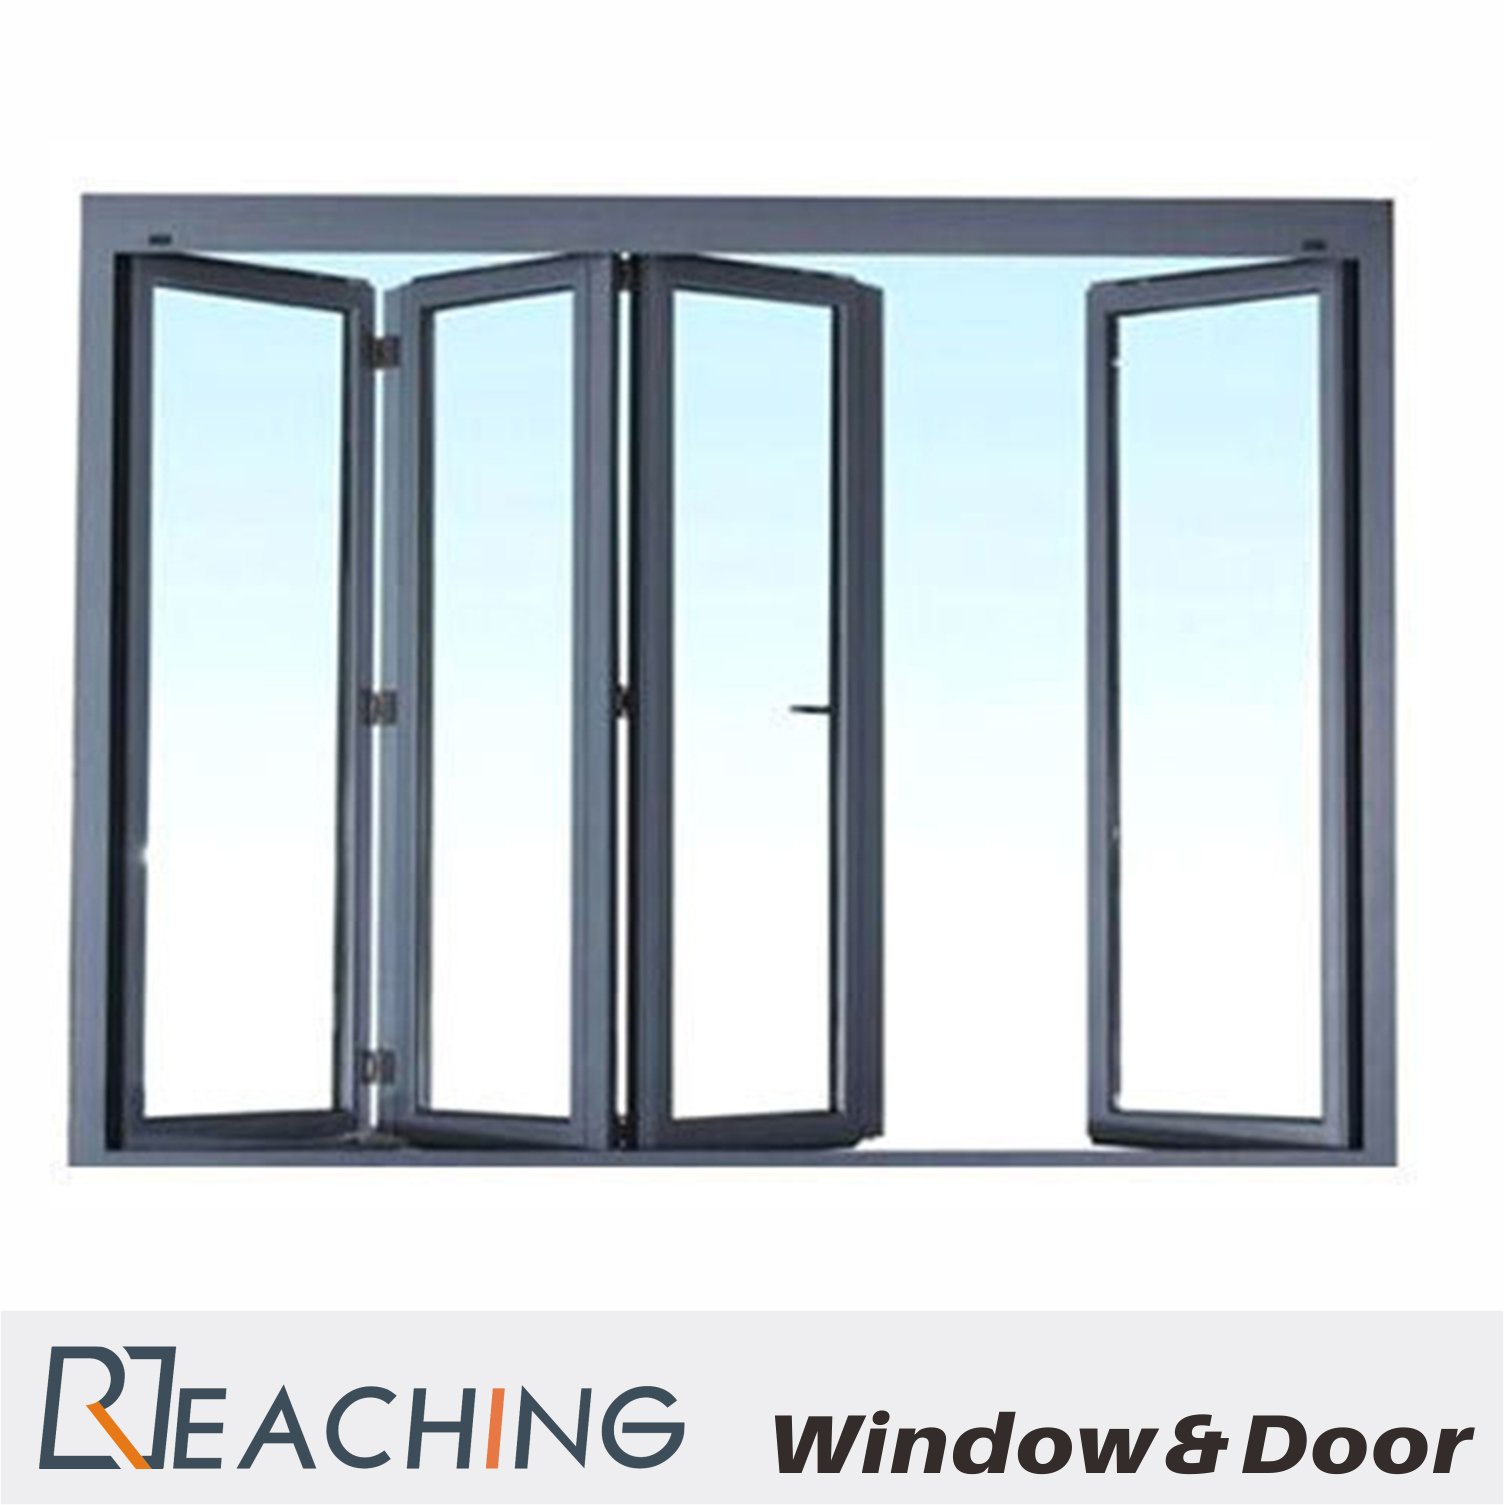 Grey Color Aluminium Folding Windows and Door with Water Proof Double Glass